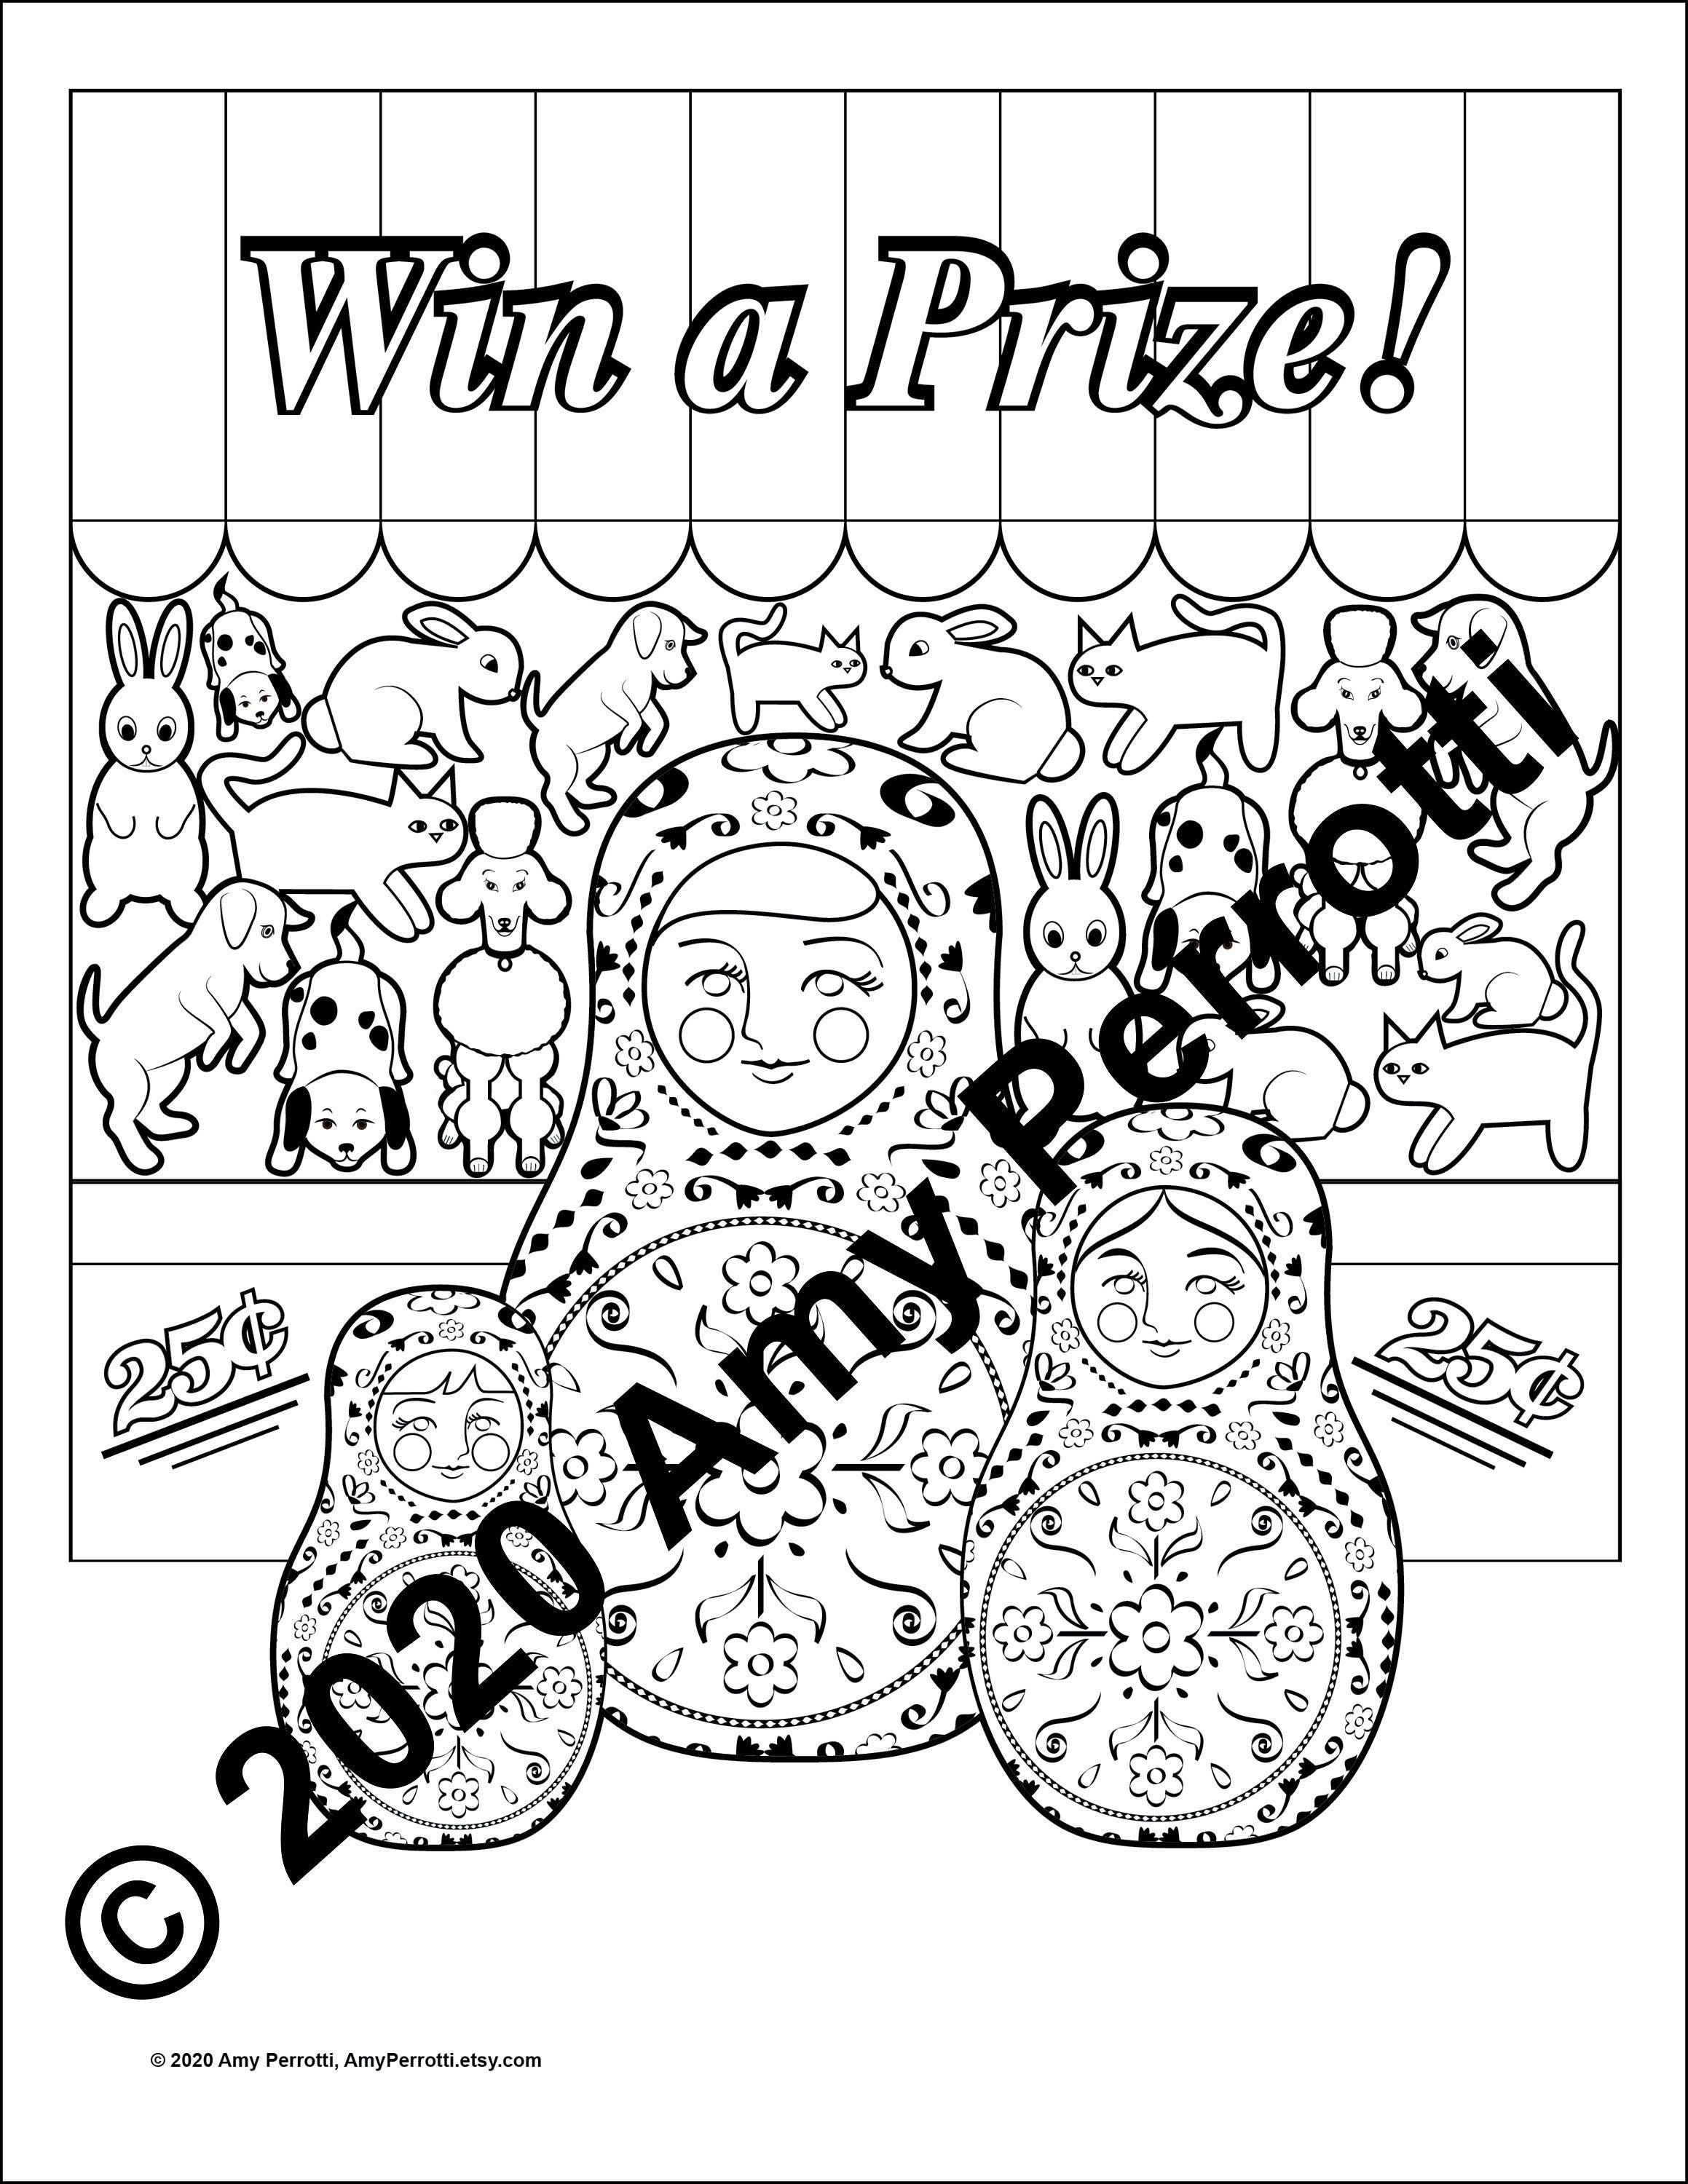 Printable Adult Color by Numbers Coloring Pages 8.5x11 Sheets